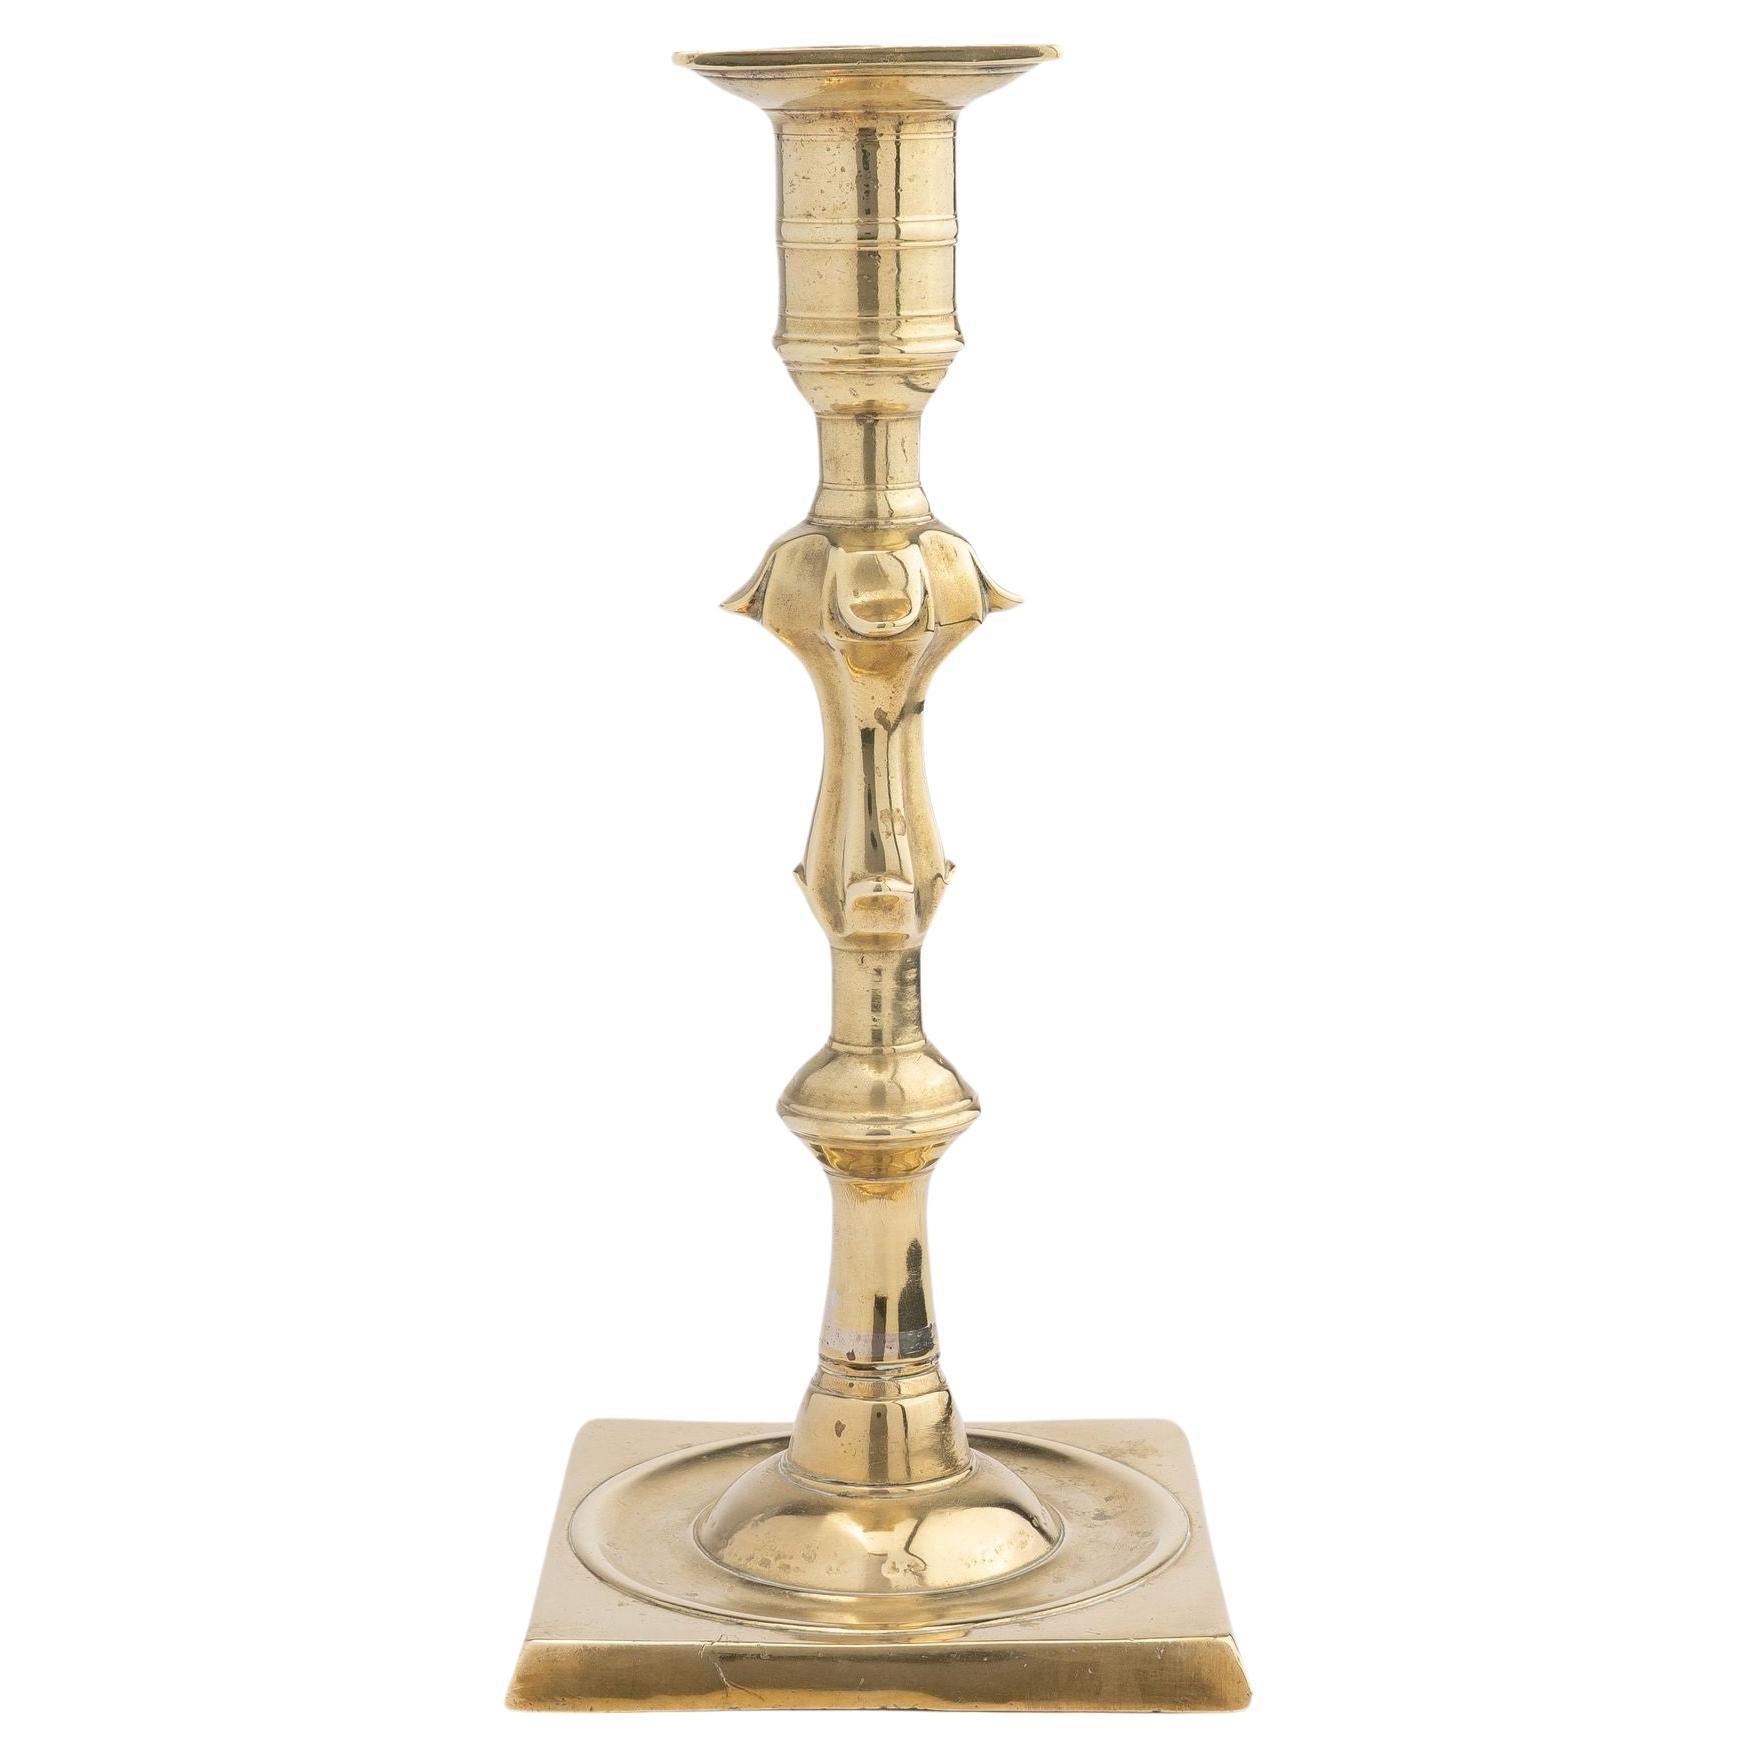 English square base Queen Anne candlestick, 1750-60